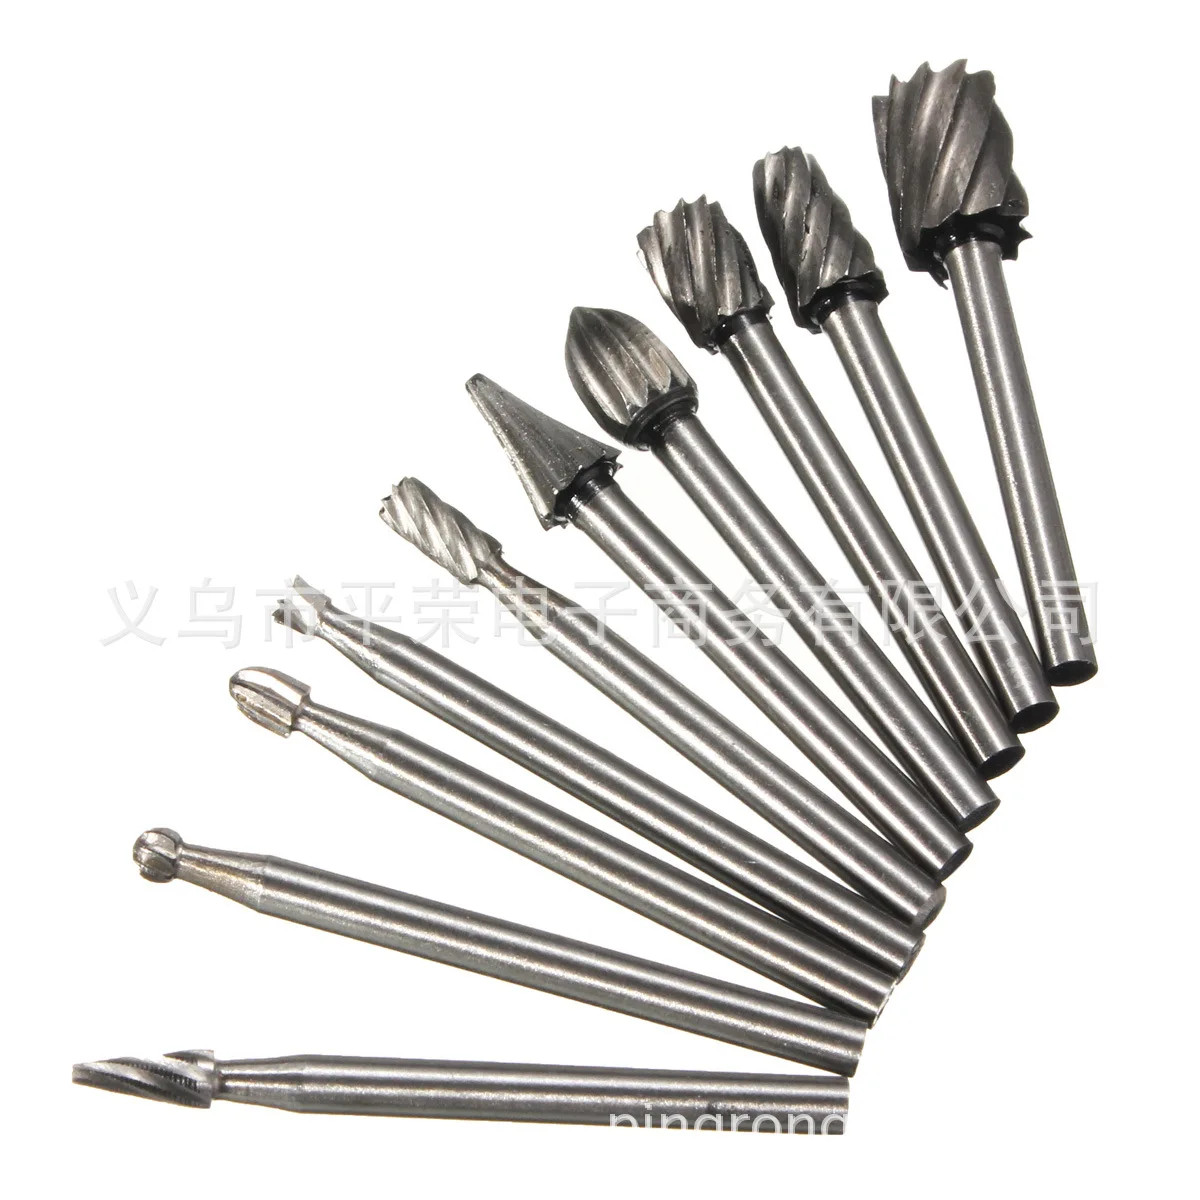 

10pcs HSS Rotary Router Drill Bit Set Burr Tools Wood Drill Cutting DIY Routing Carving Electric Grinding Head EngravingTool